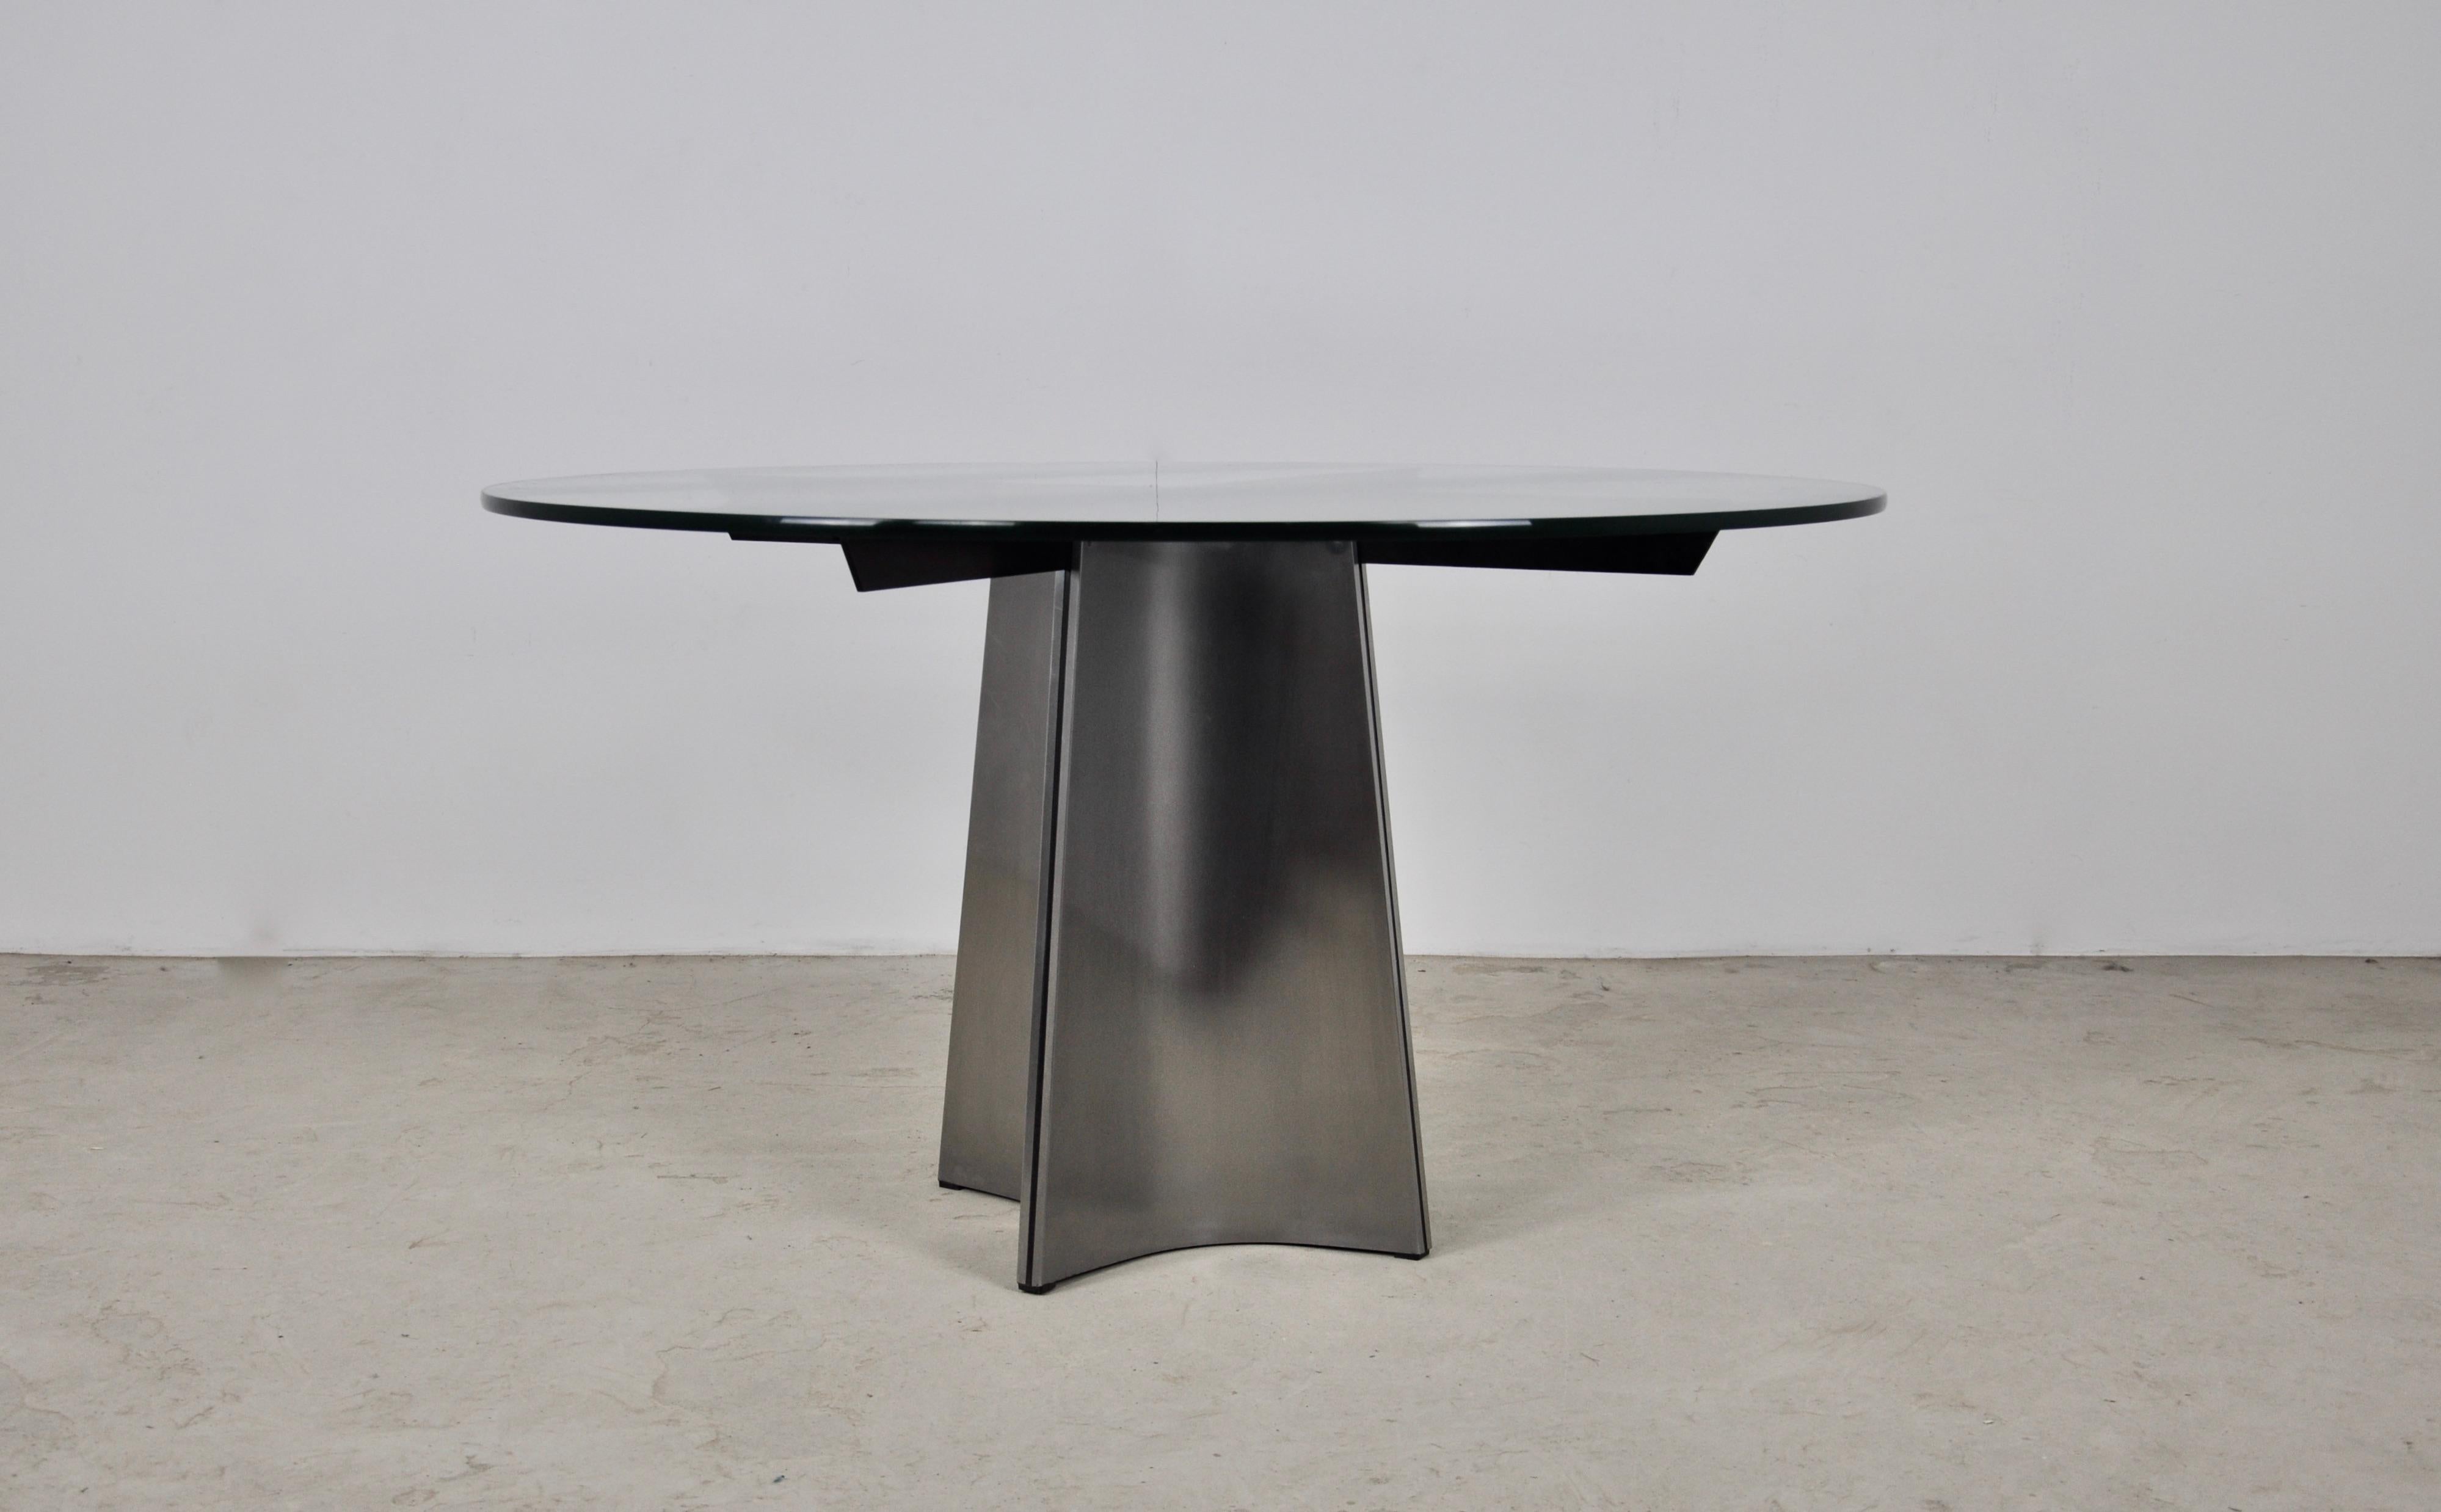 Table with glass top and brushed metal base. Wear due to time and age of the table.